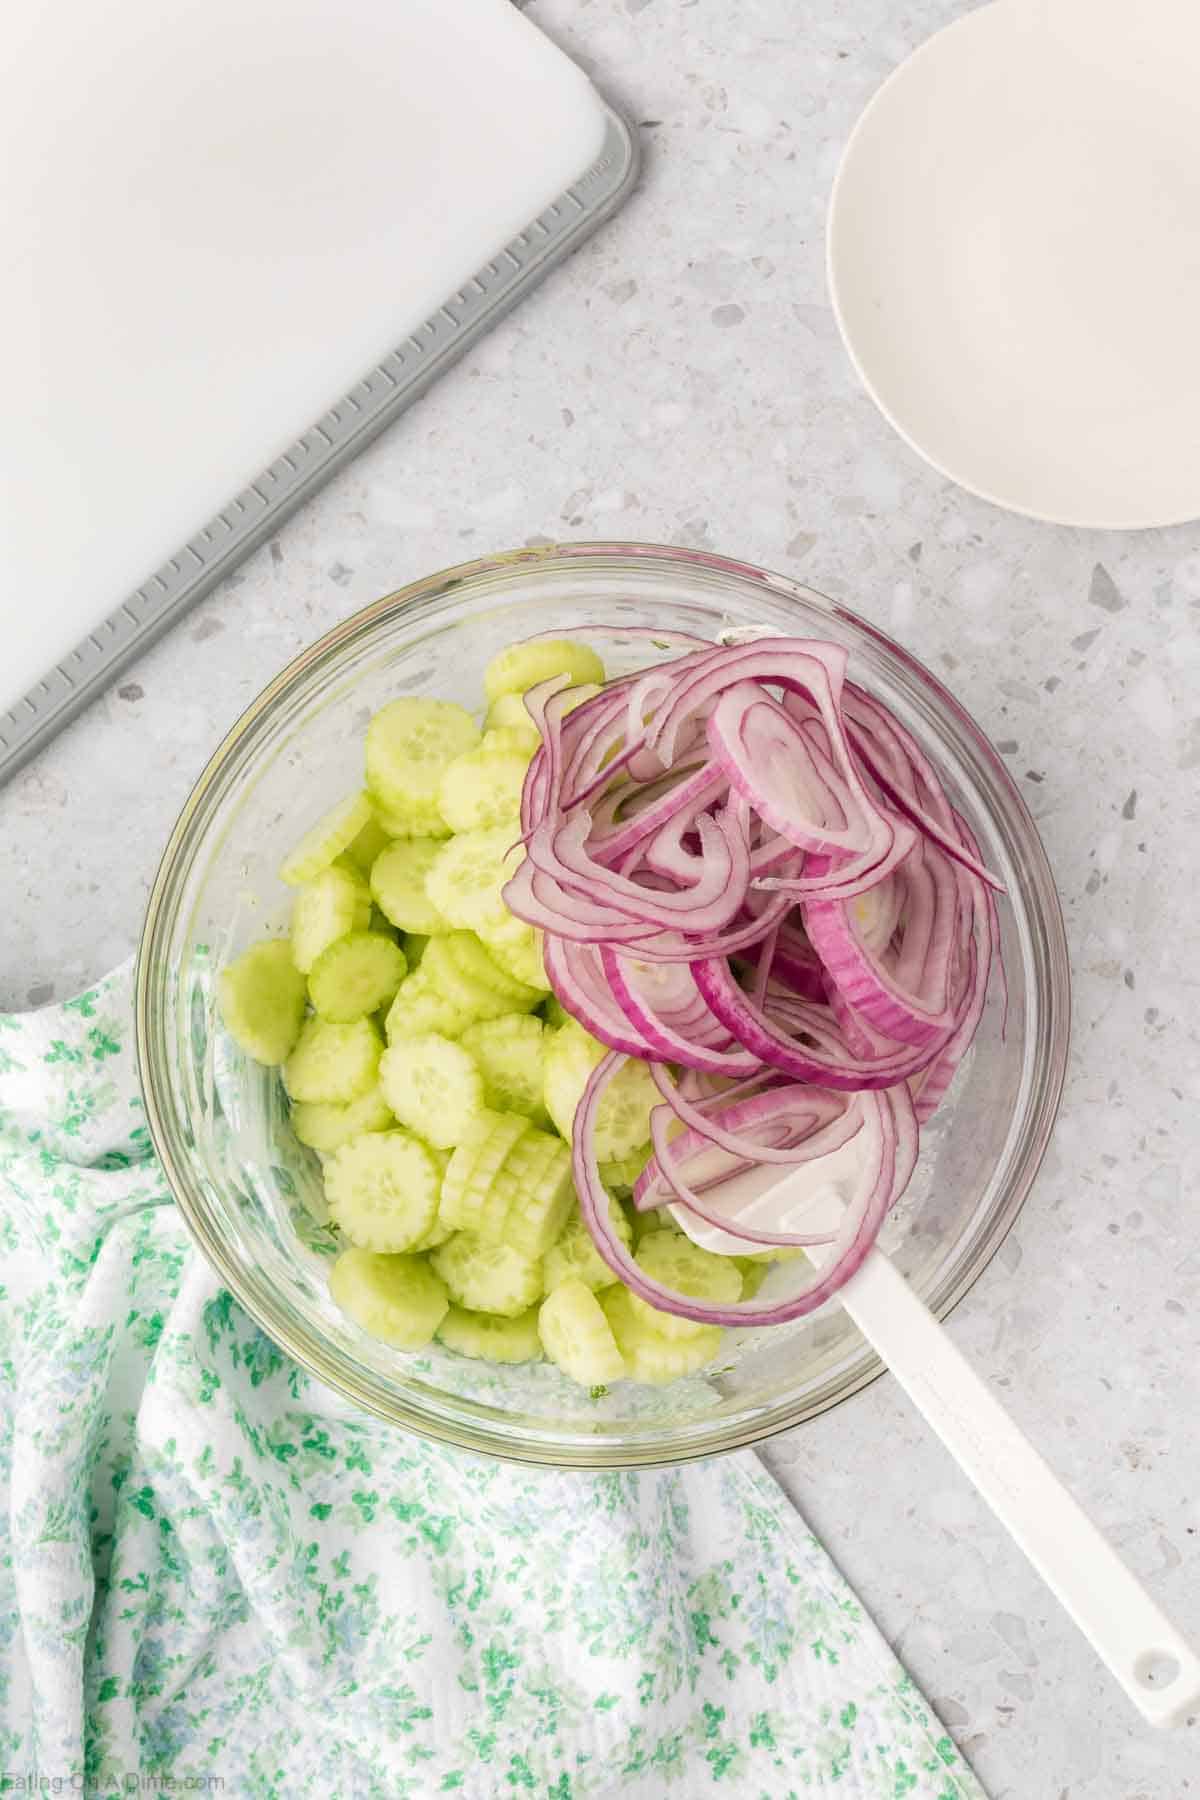 Placing onions and cucumbers in a bowl